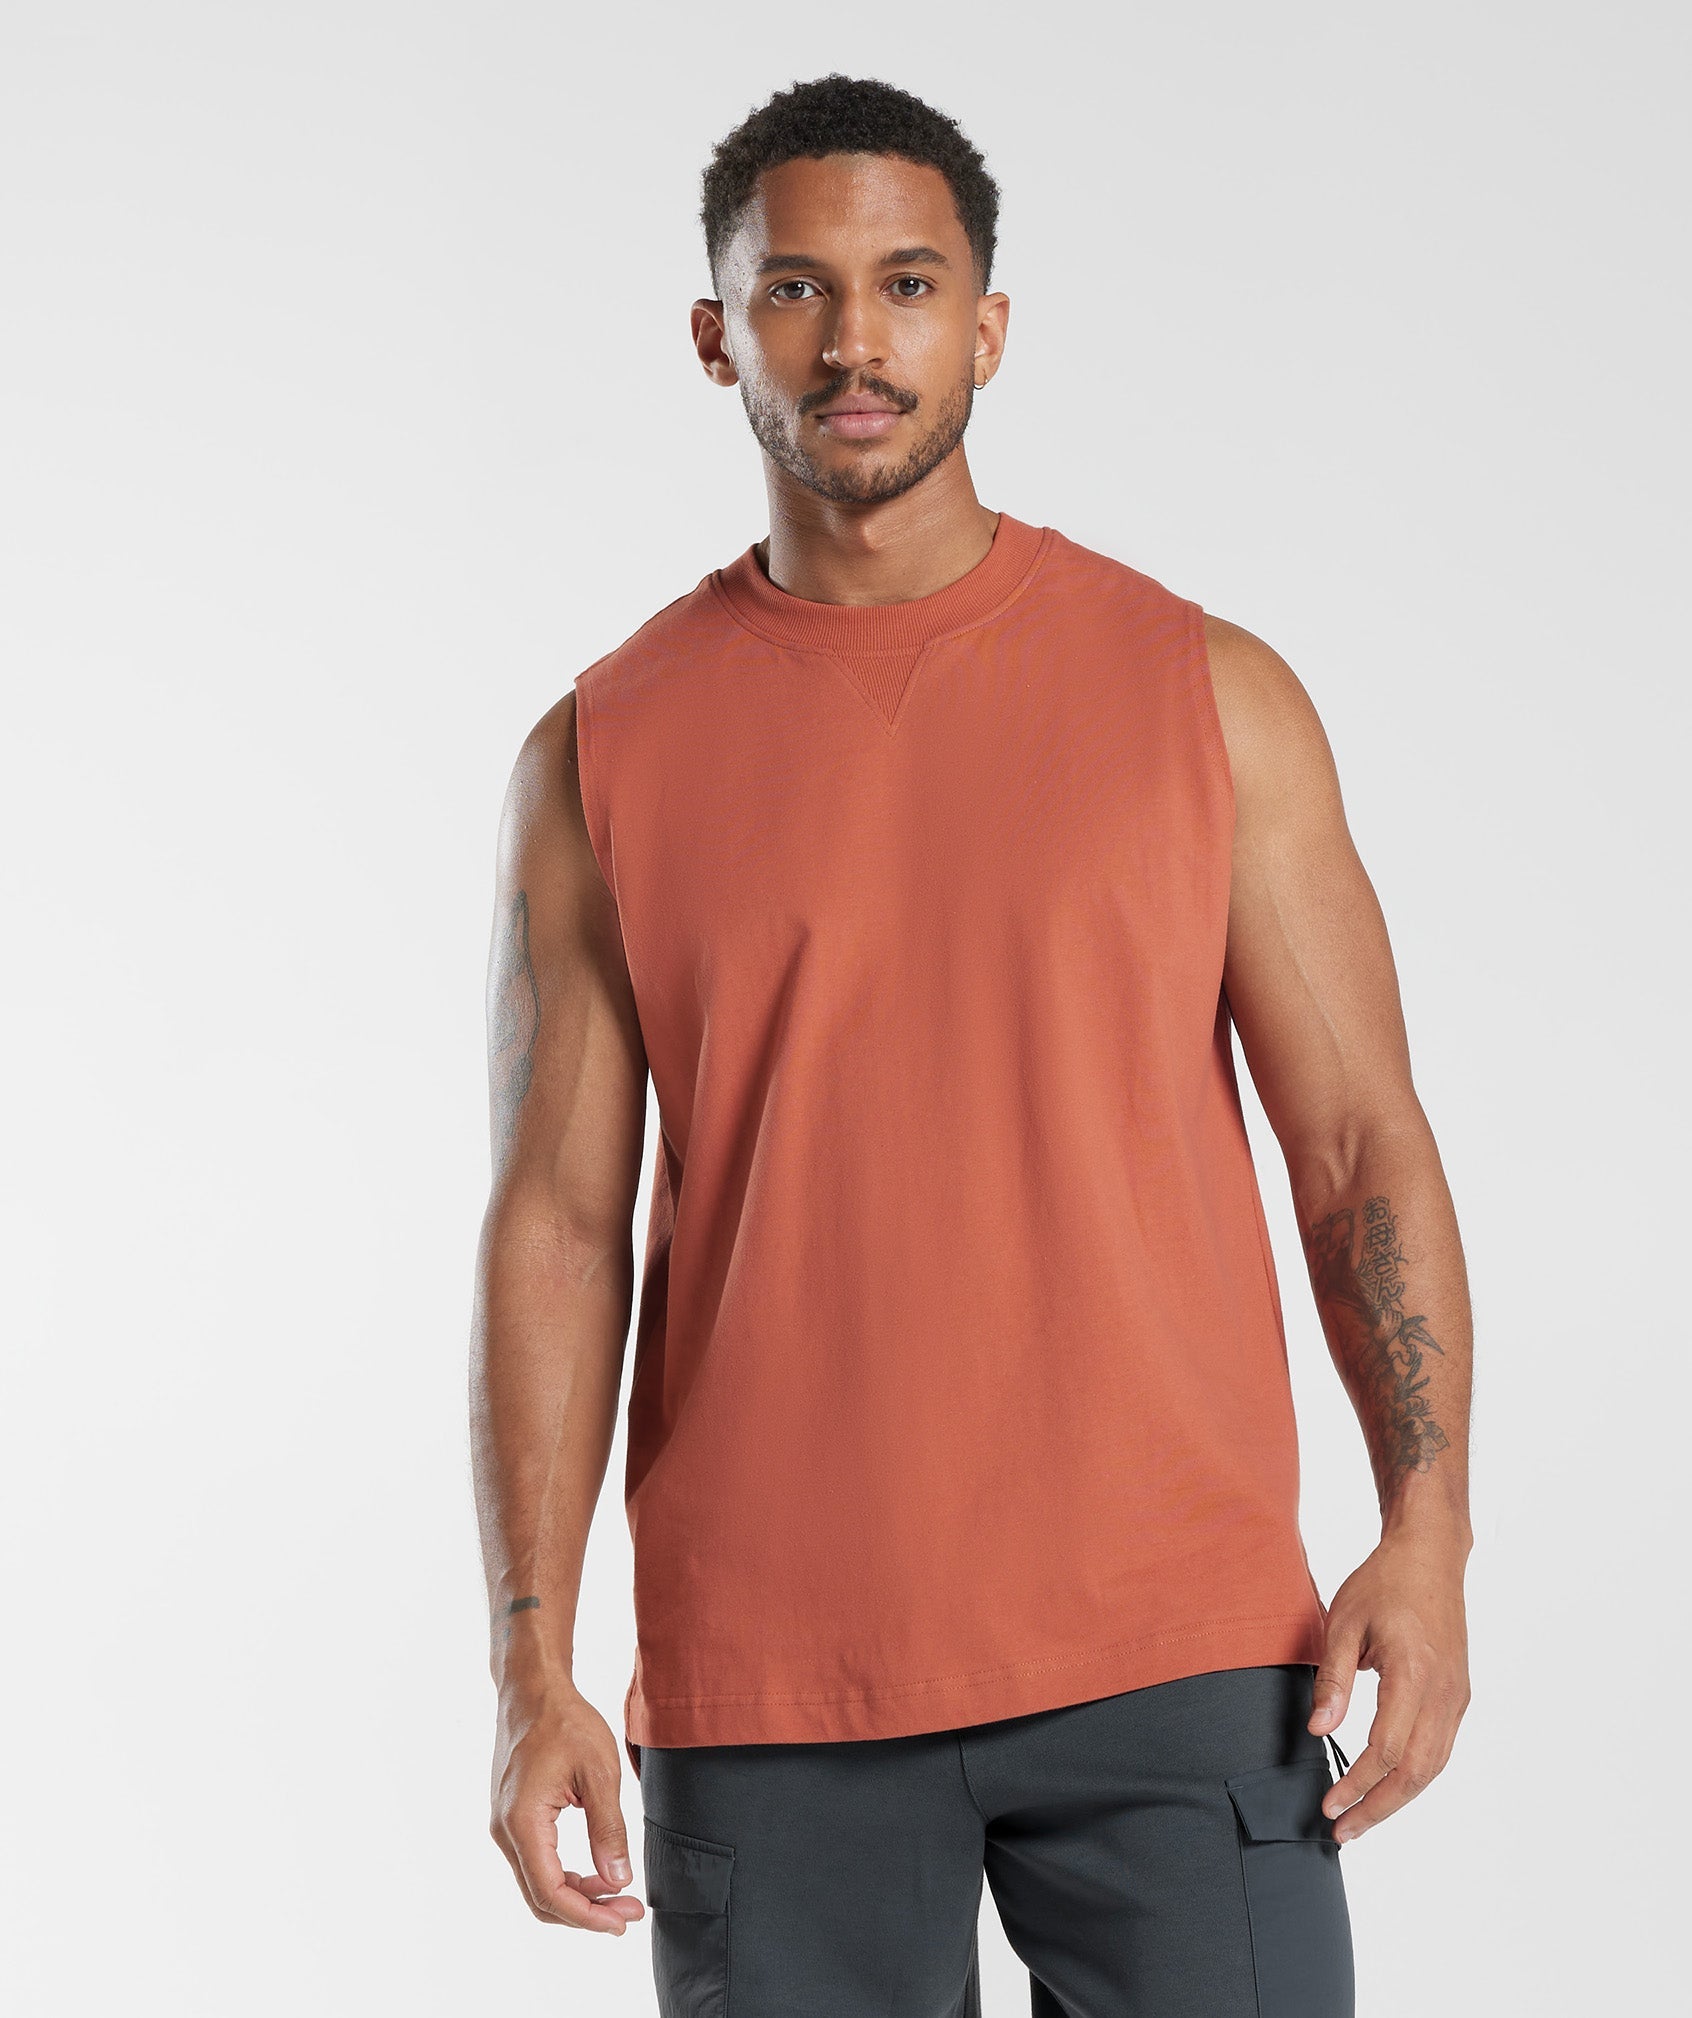 Rest Day Essentials Tank in Persimmon Red